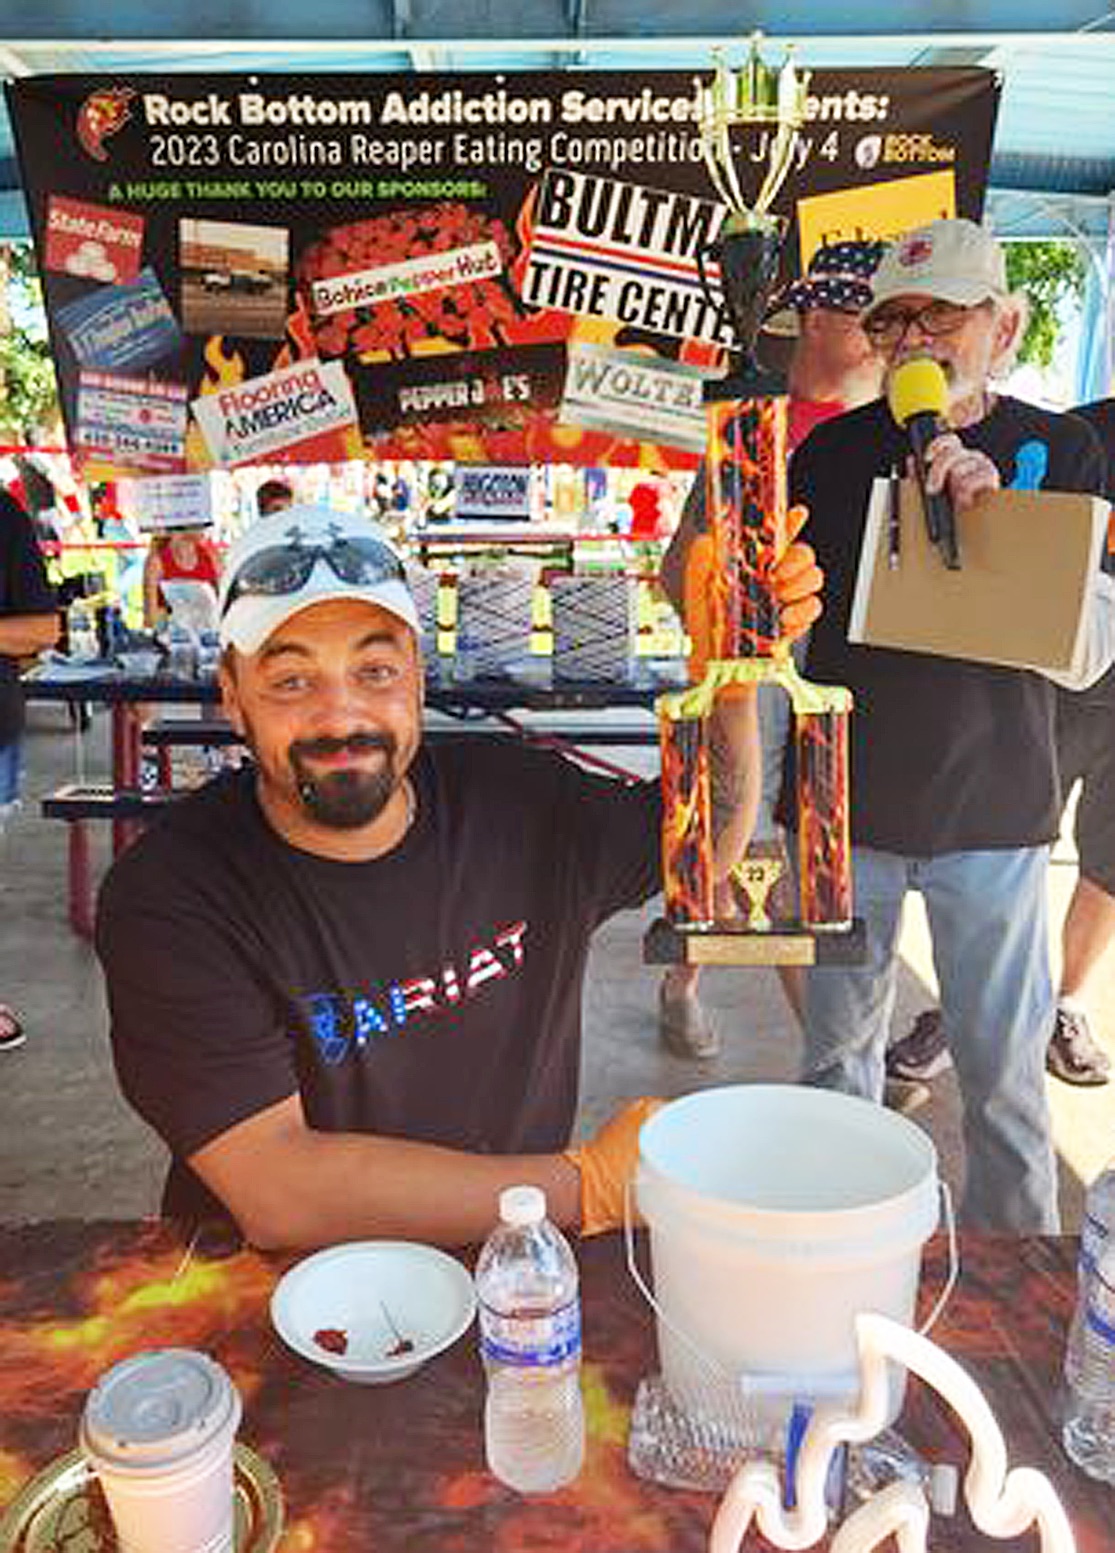 Emelio Ramirez is the first place winner in the Hot Pepper Eating Contest by Rock Bottom Addiction Services-Arick Miller at the Hugoton City Park July 4. Photo courtesy of Rock Bottom Addiction Services.